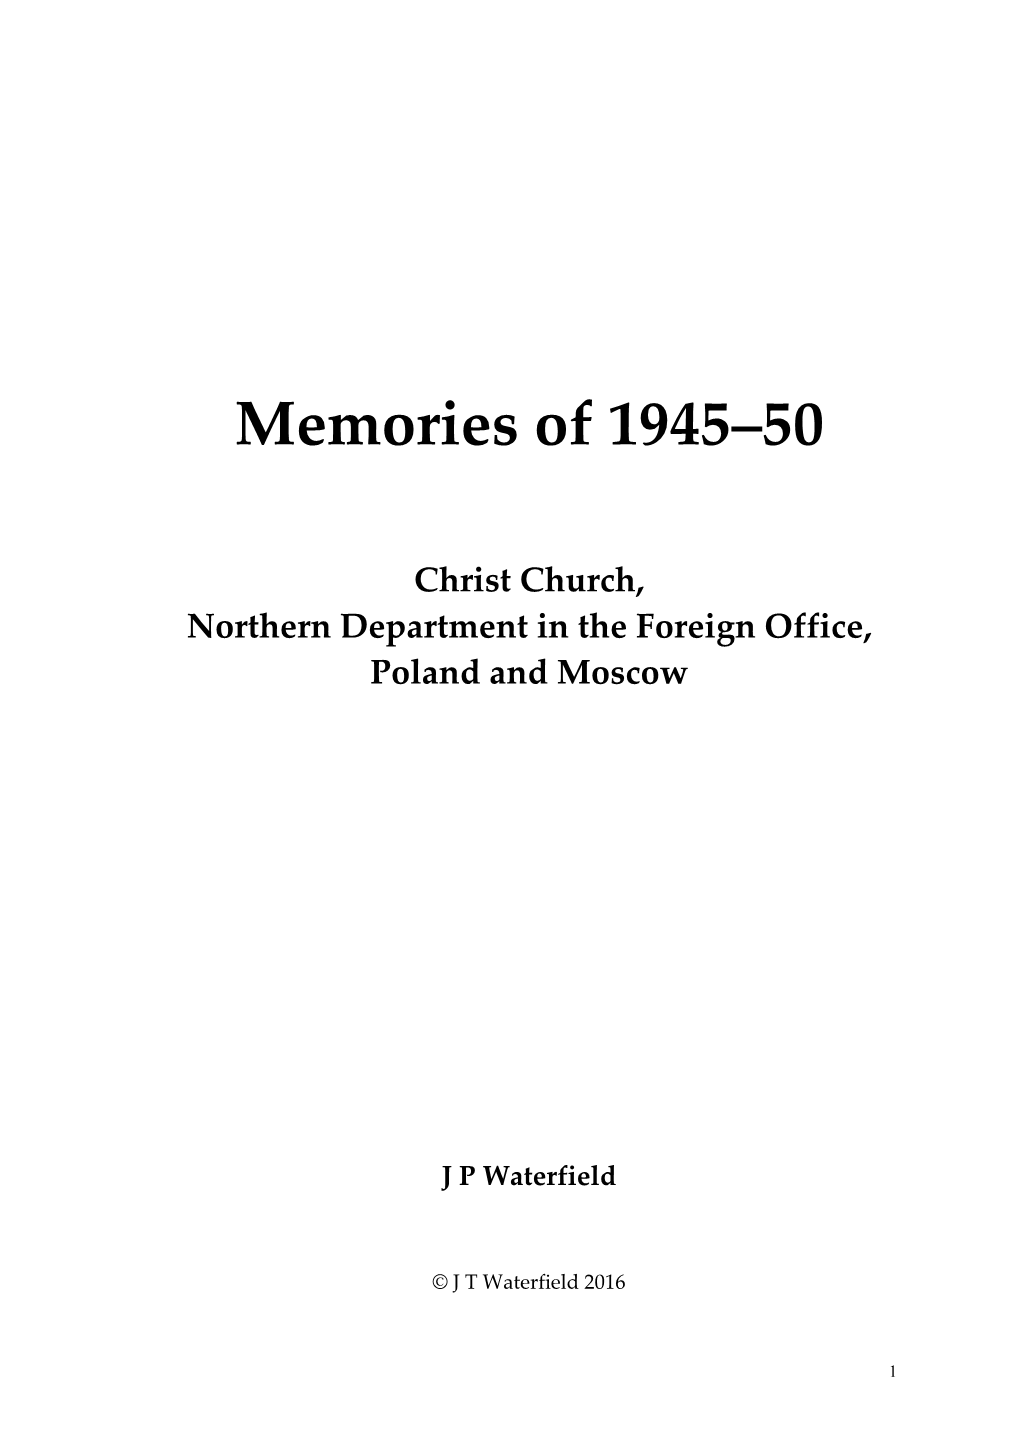 Memories of Christ Church, Northern Department in the Foreign Office, Poland and Moscow 1945 - 50